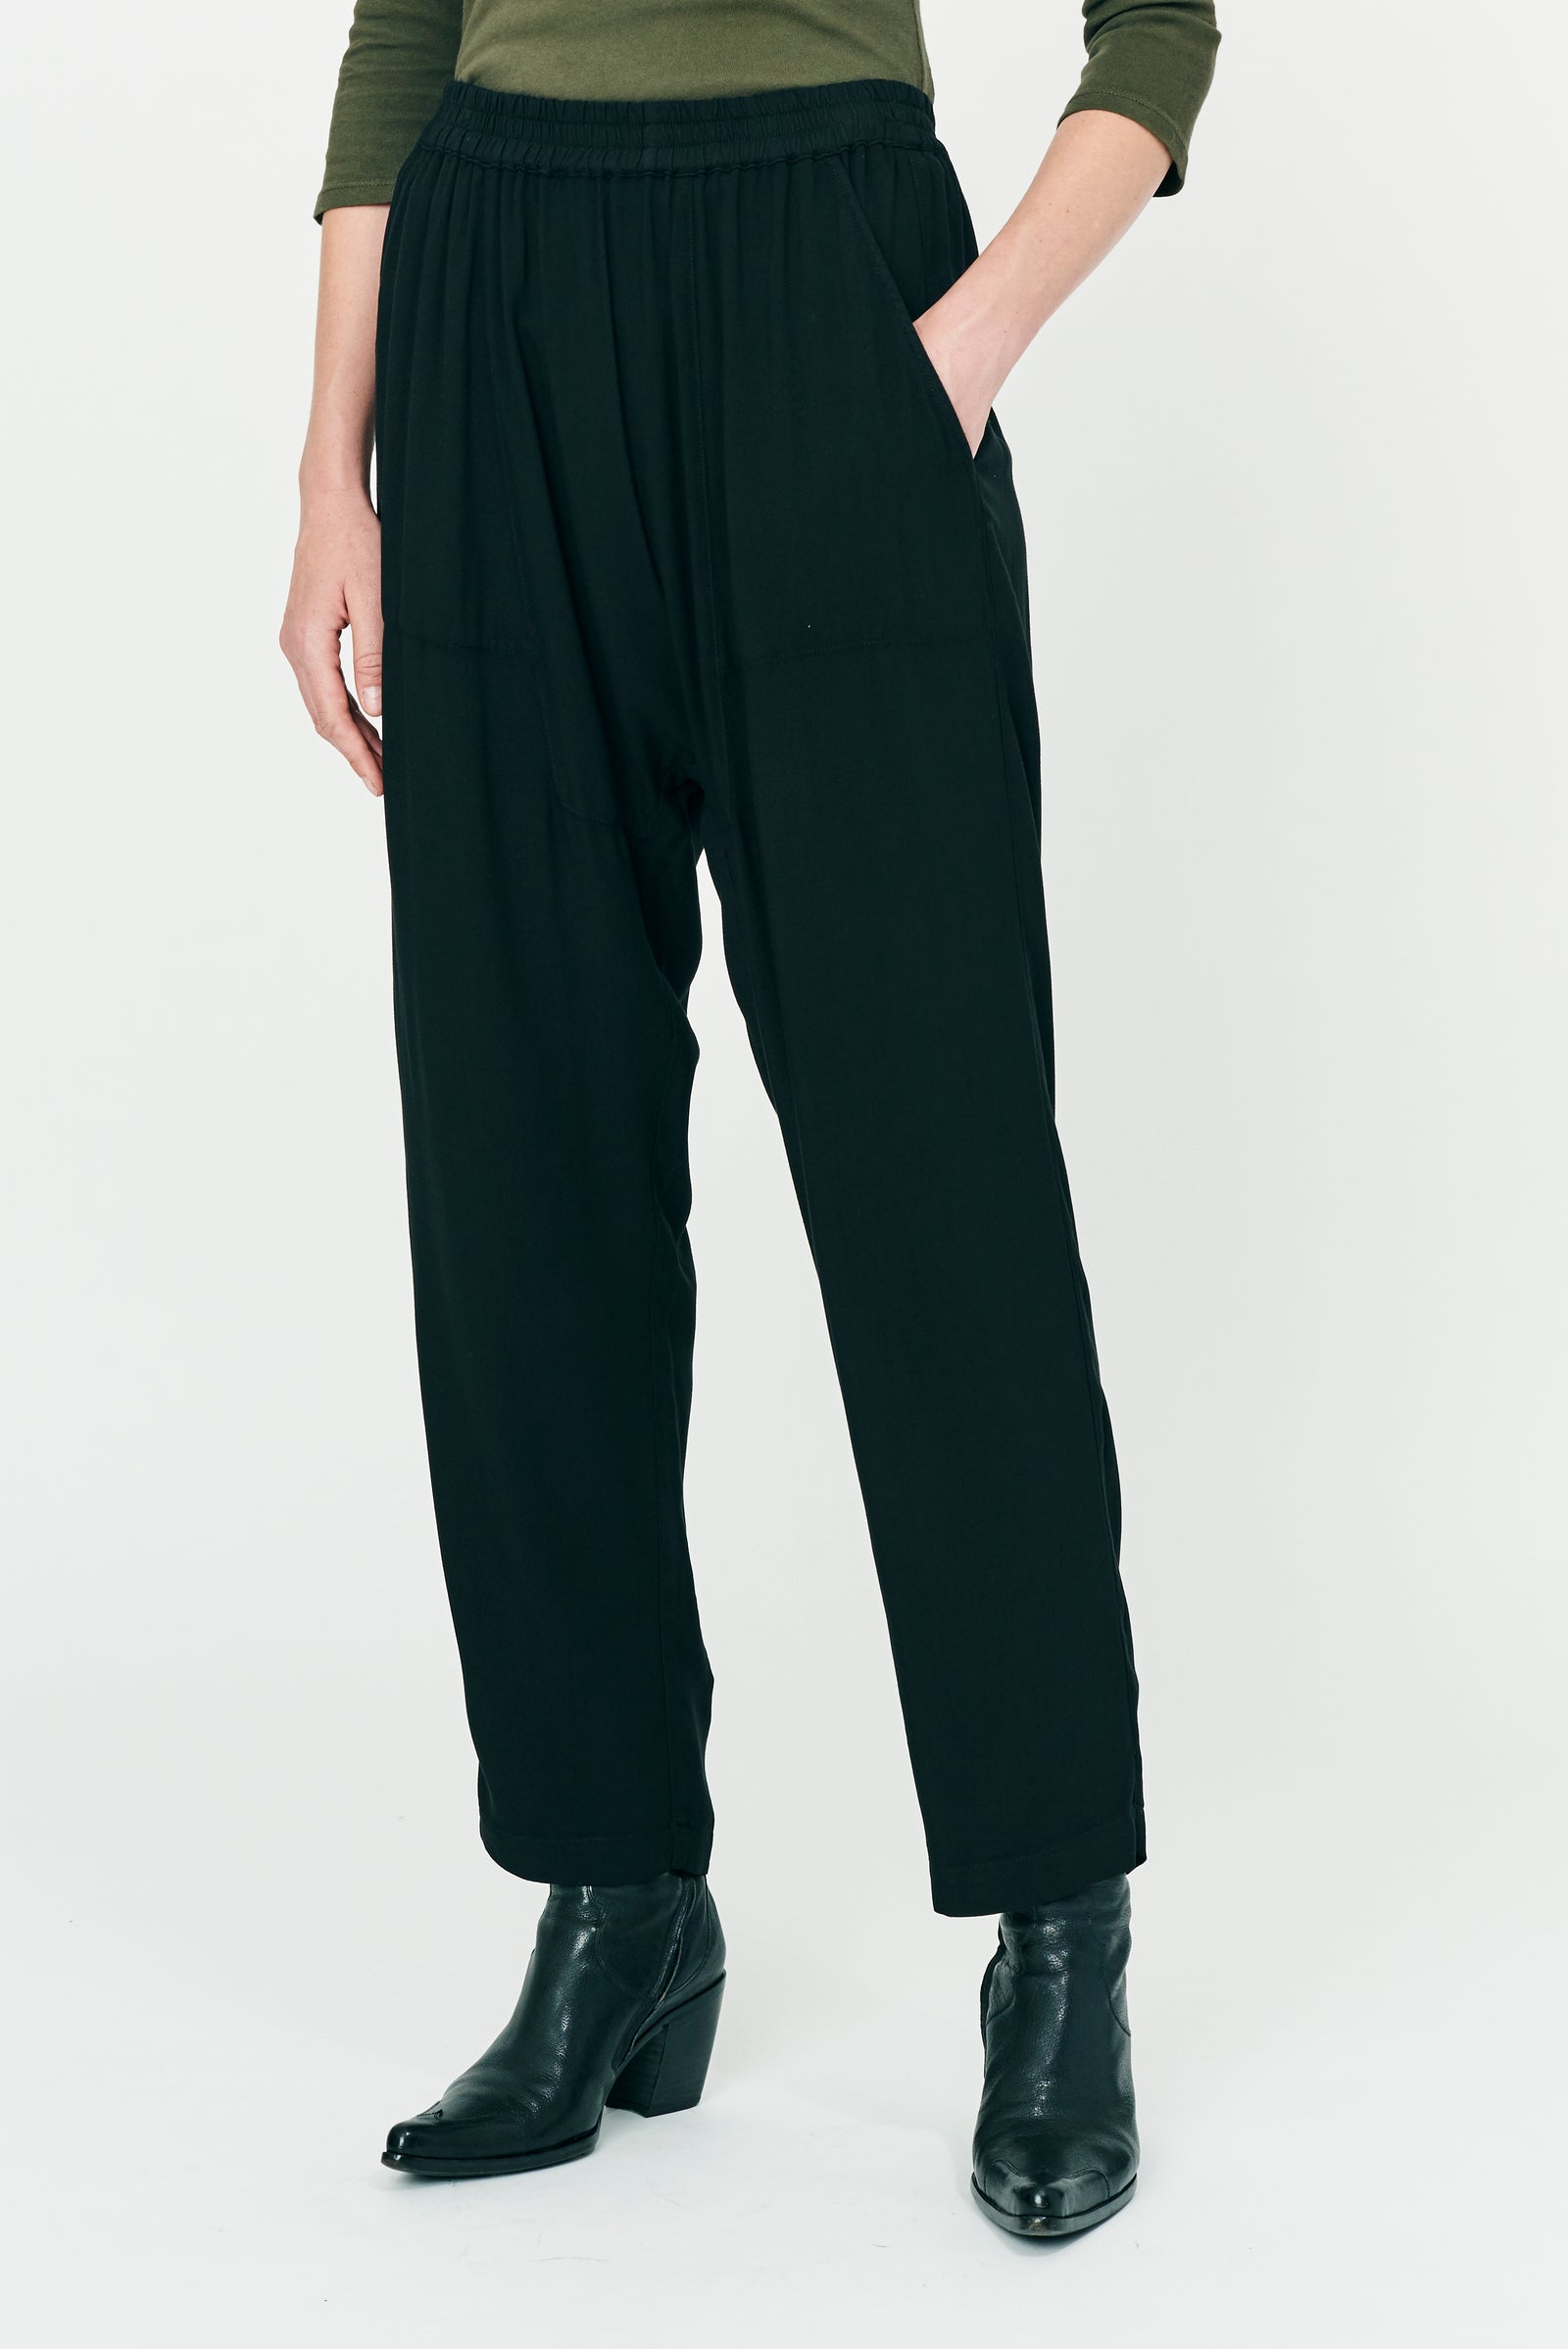 Black Ghost Ranch Soft Twill Sunday Pant RA-PANT ARCHIVE-FALL2'22   